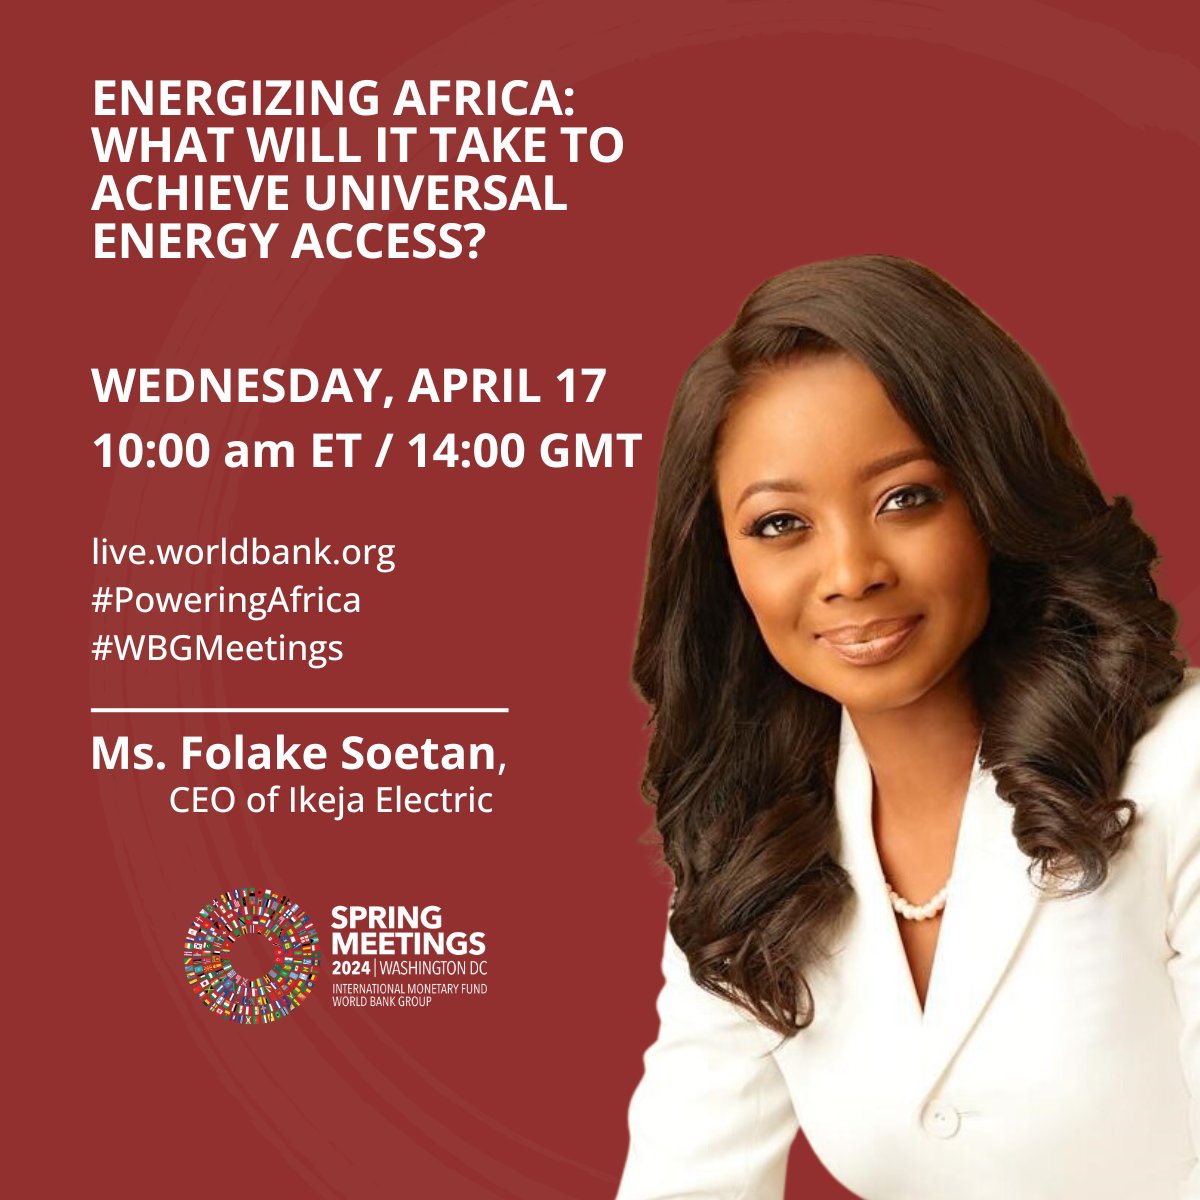 #WBGmeetings EVENT | What will it take to achieve universal #EnergyAccess in Africa? Join the conversation with a panel of experts from the public and private sectors to find out! April 17, 10am ET | 2pm GMT wrld.bg/FpZl50RfPzB #PoweringAfrica @AfDB_Group @IMFAfrica